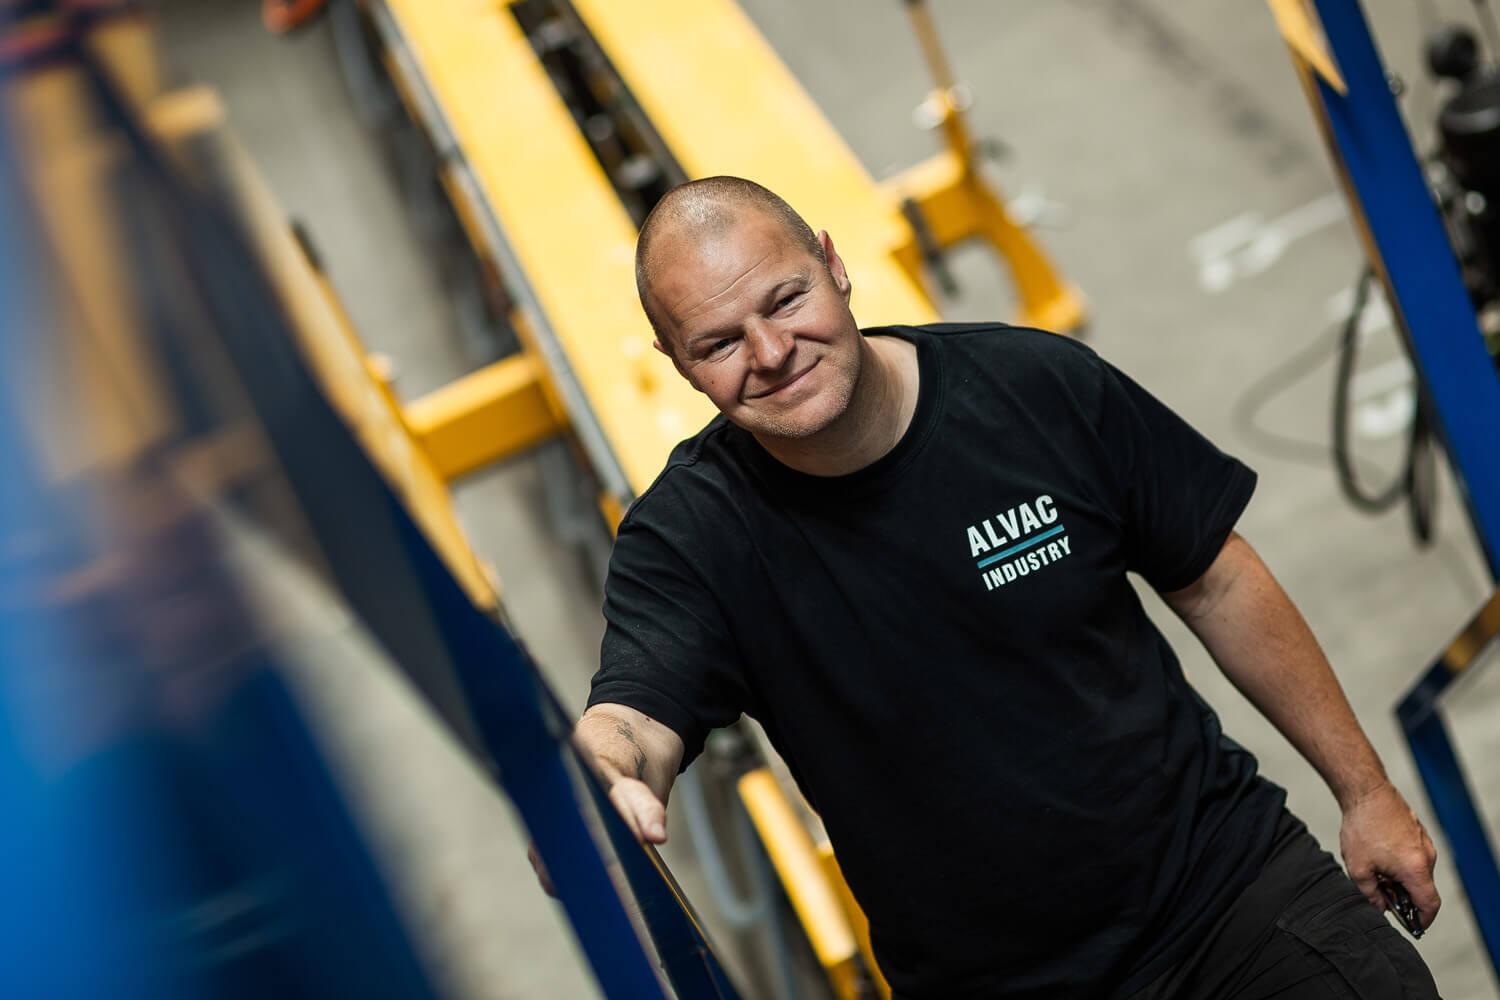 We're ambitious people - become a part of the success within glass lifting